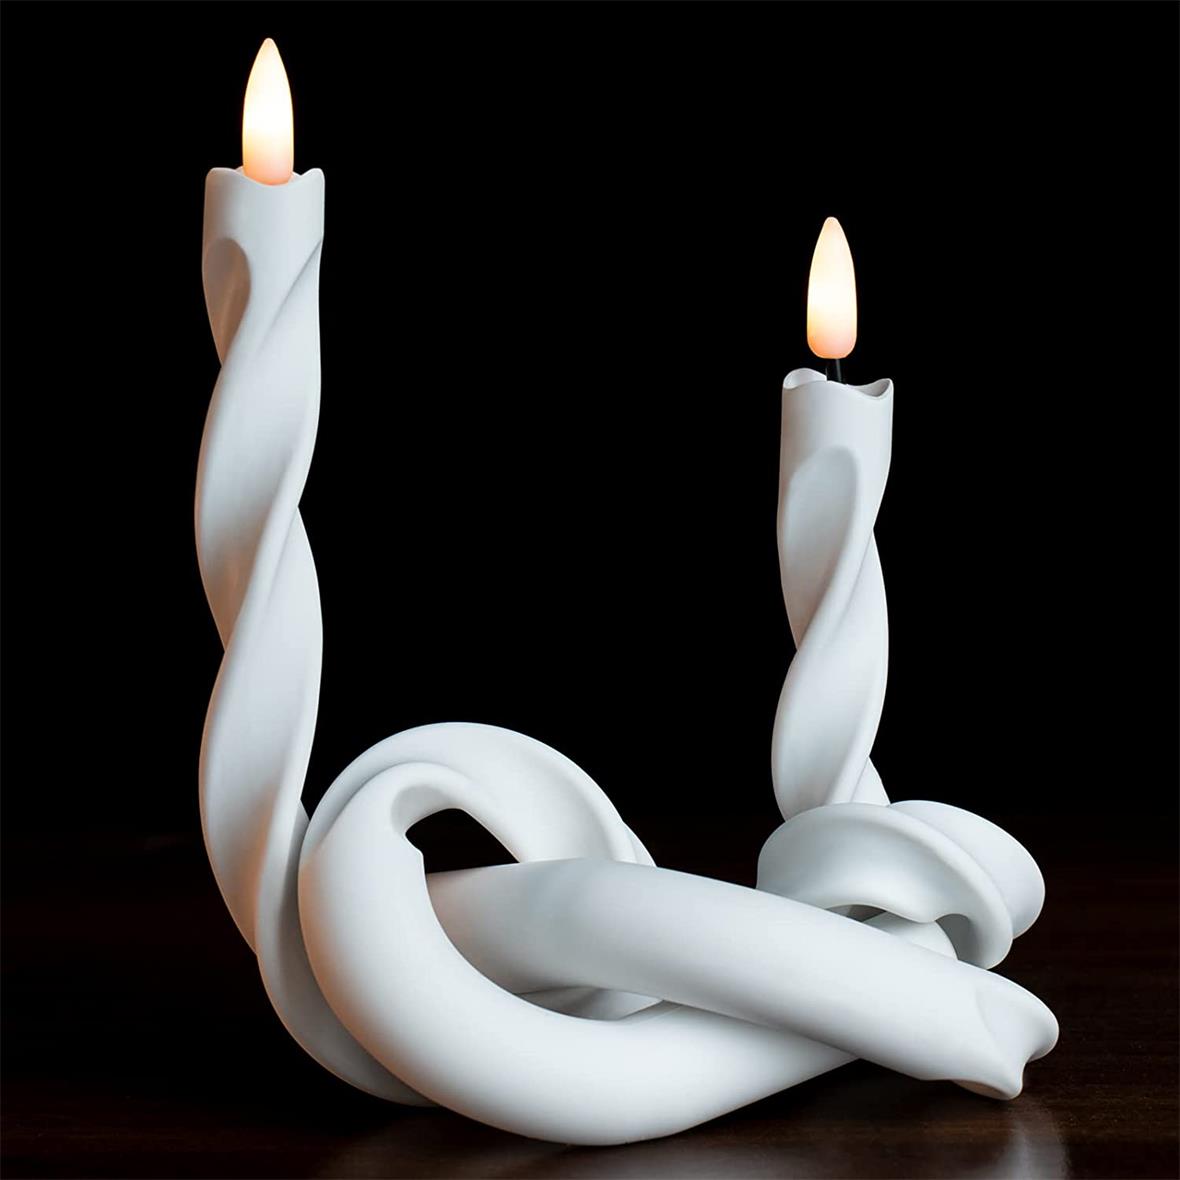 Yongmao Flameless Spiral Taper Candles Twisted Rechargeable LED Electric Fake Flickering Candles for Home Wedding Party Christmas Decoration (2Pcs, White)